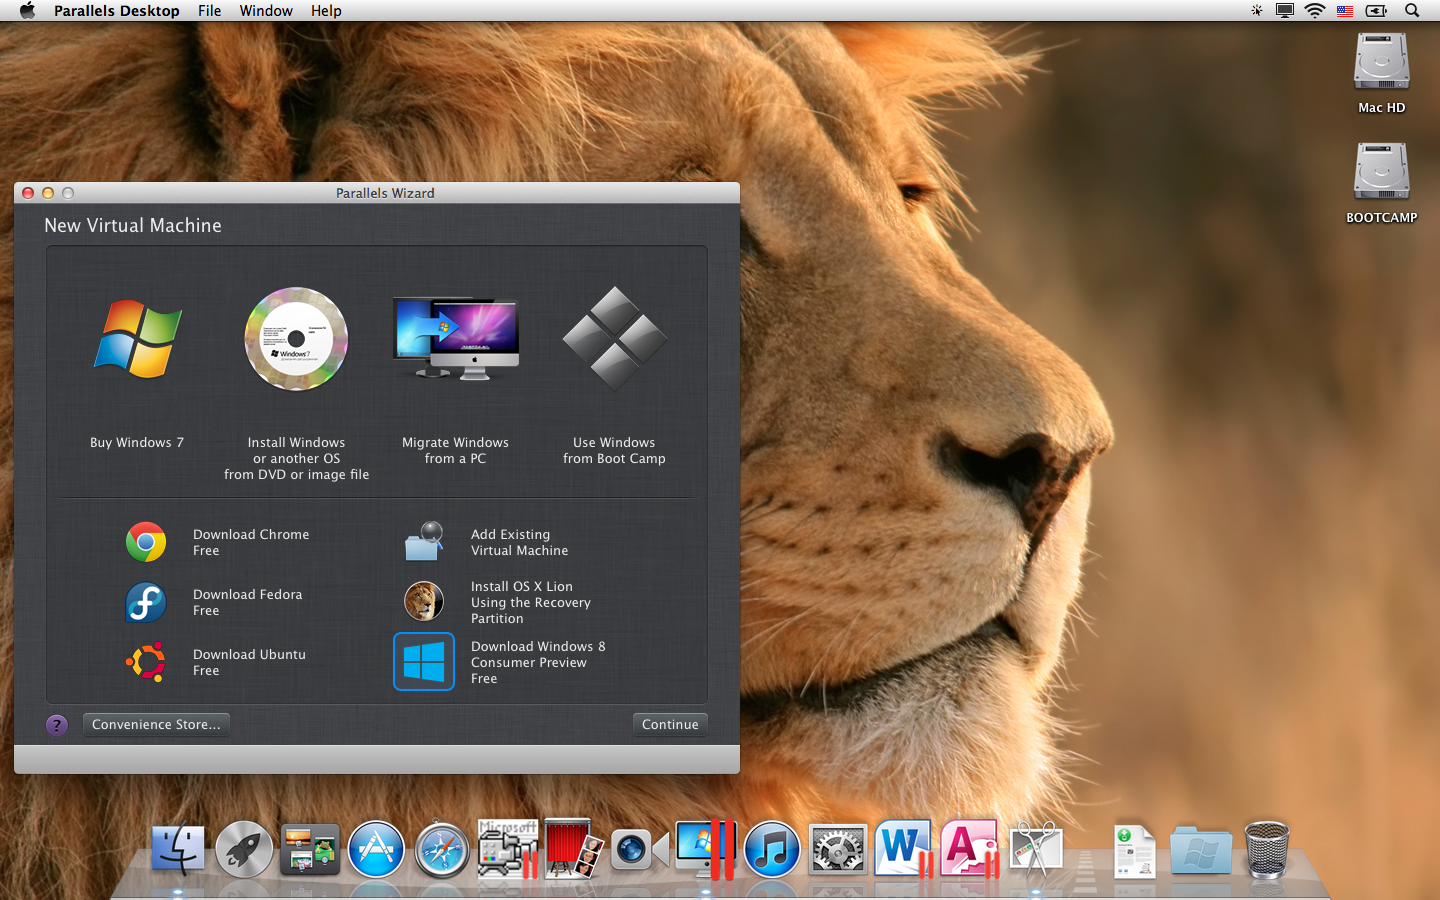 Download Mac Operation System Lion